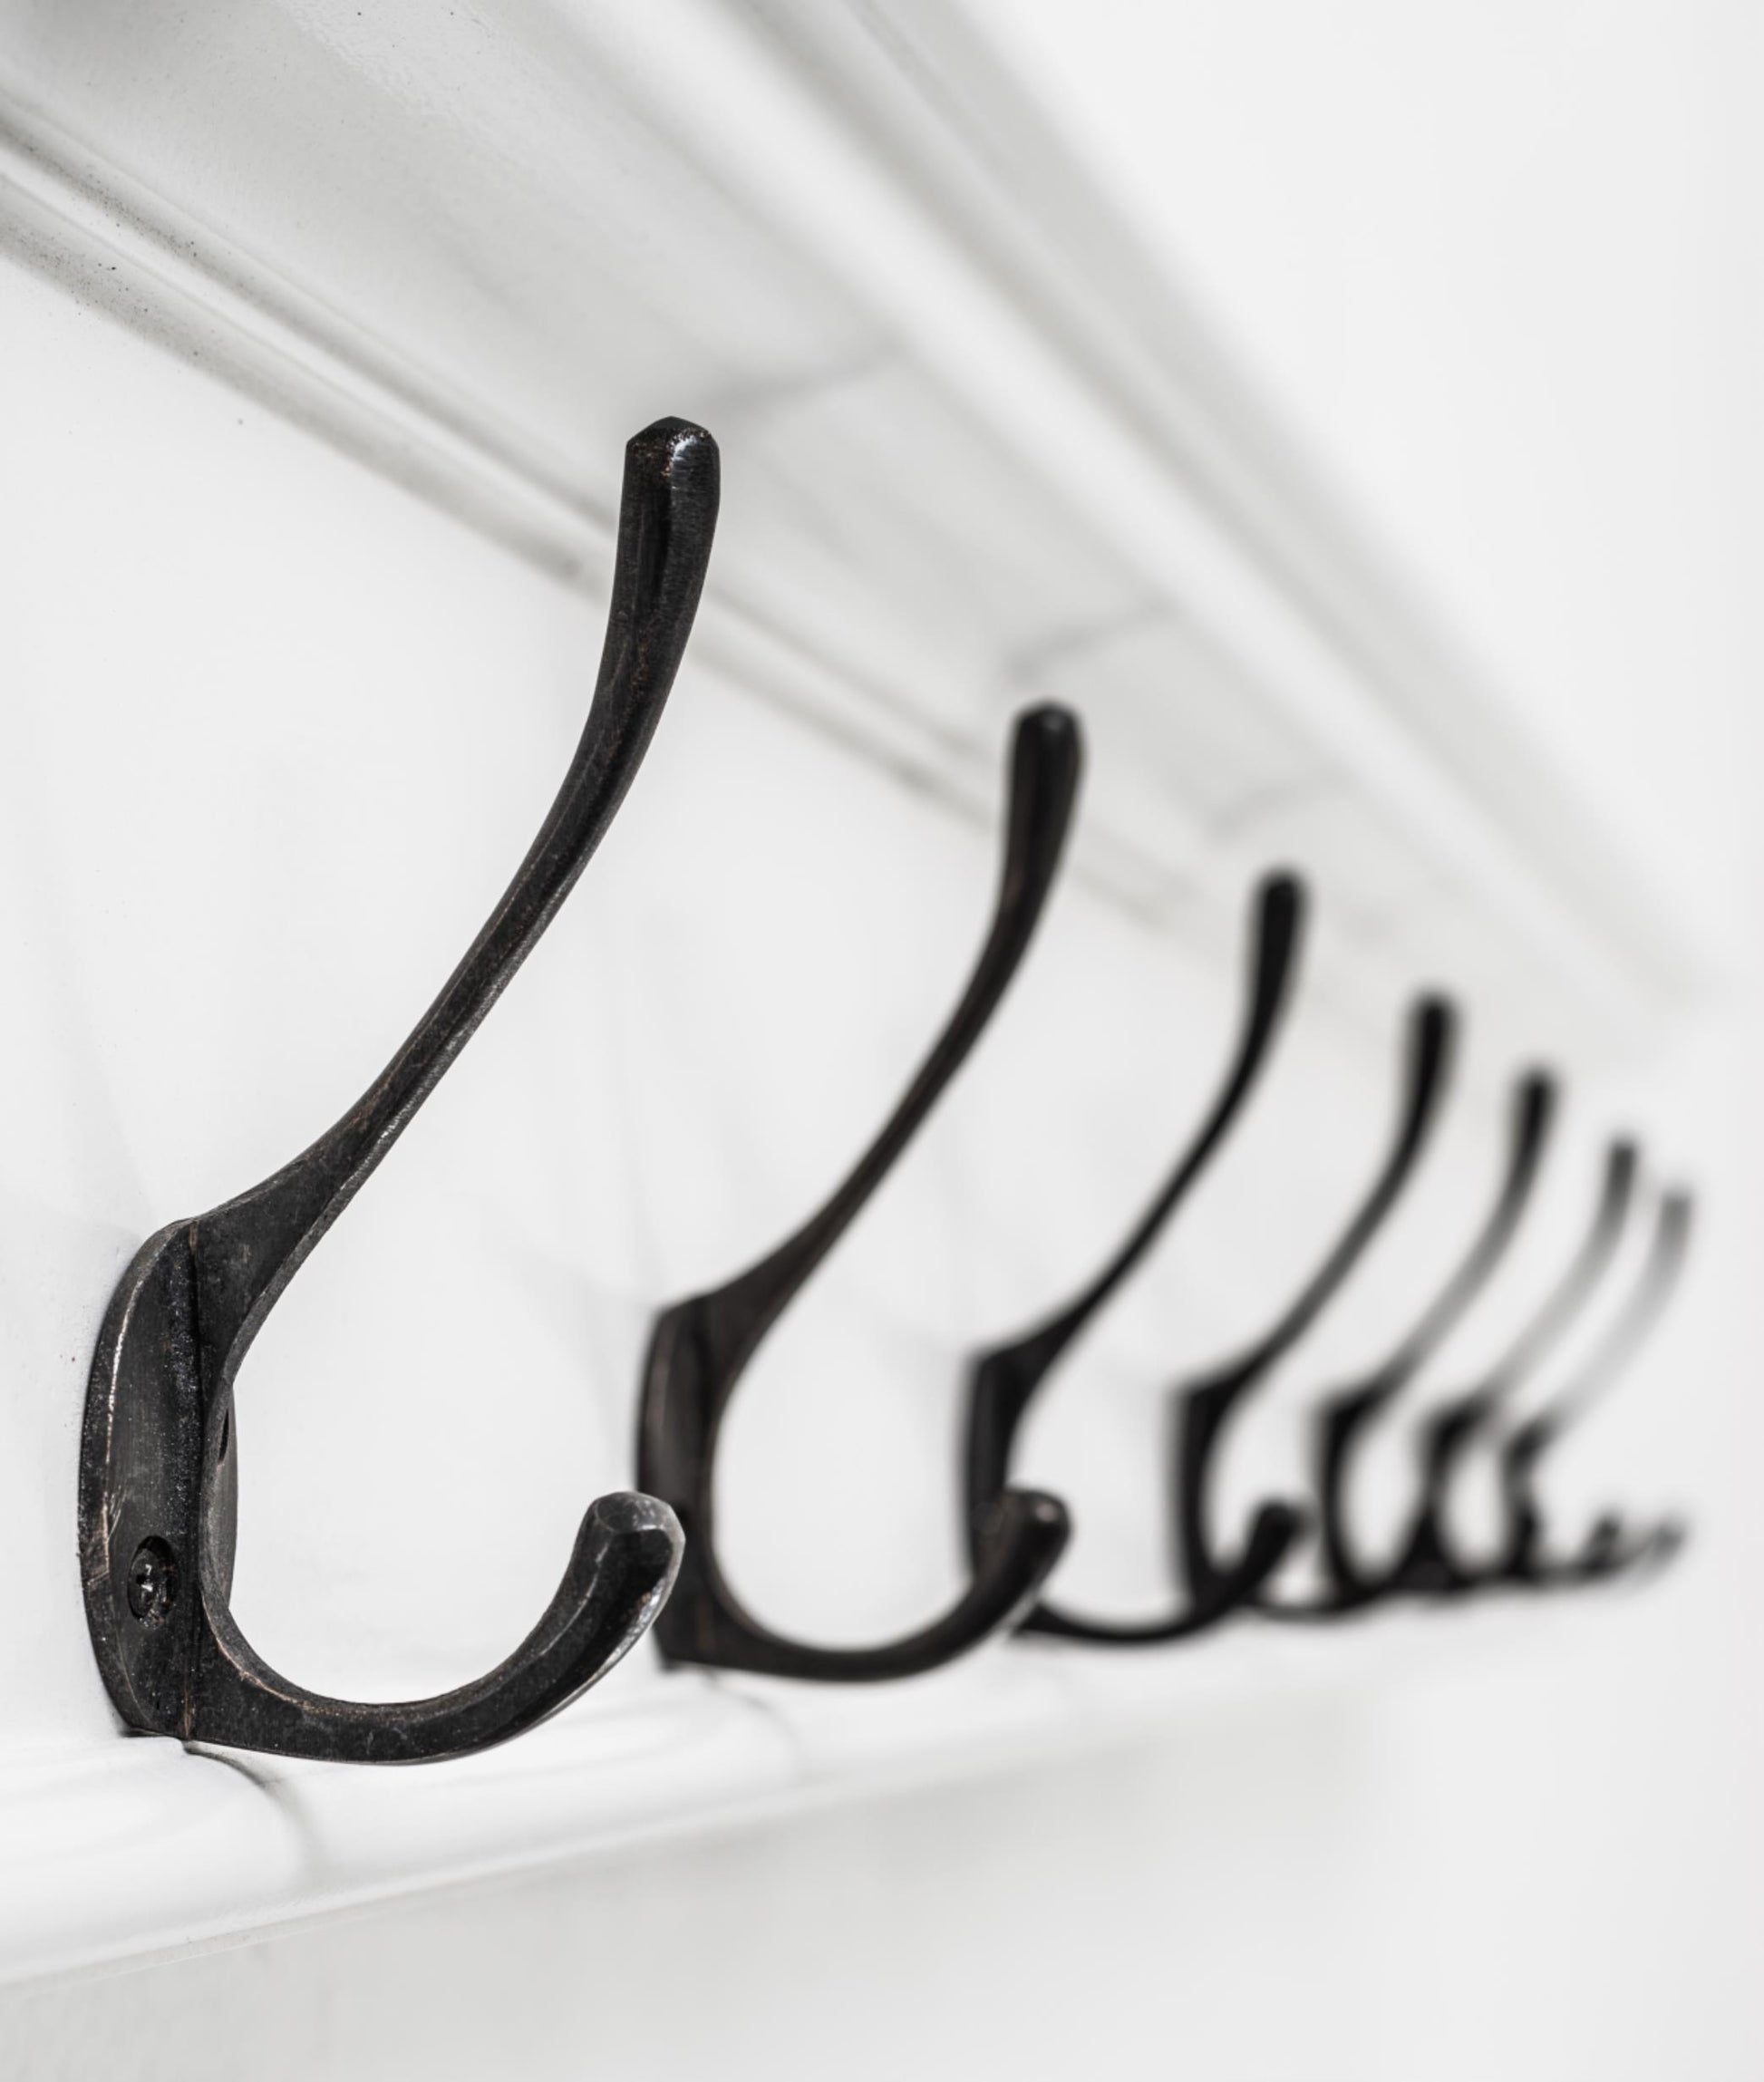 Halifax collection by Nova Solo. Classic White 8 Hook Coat Rack CasaFenix